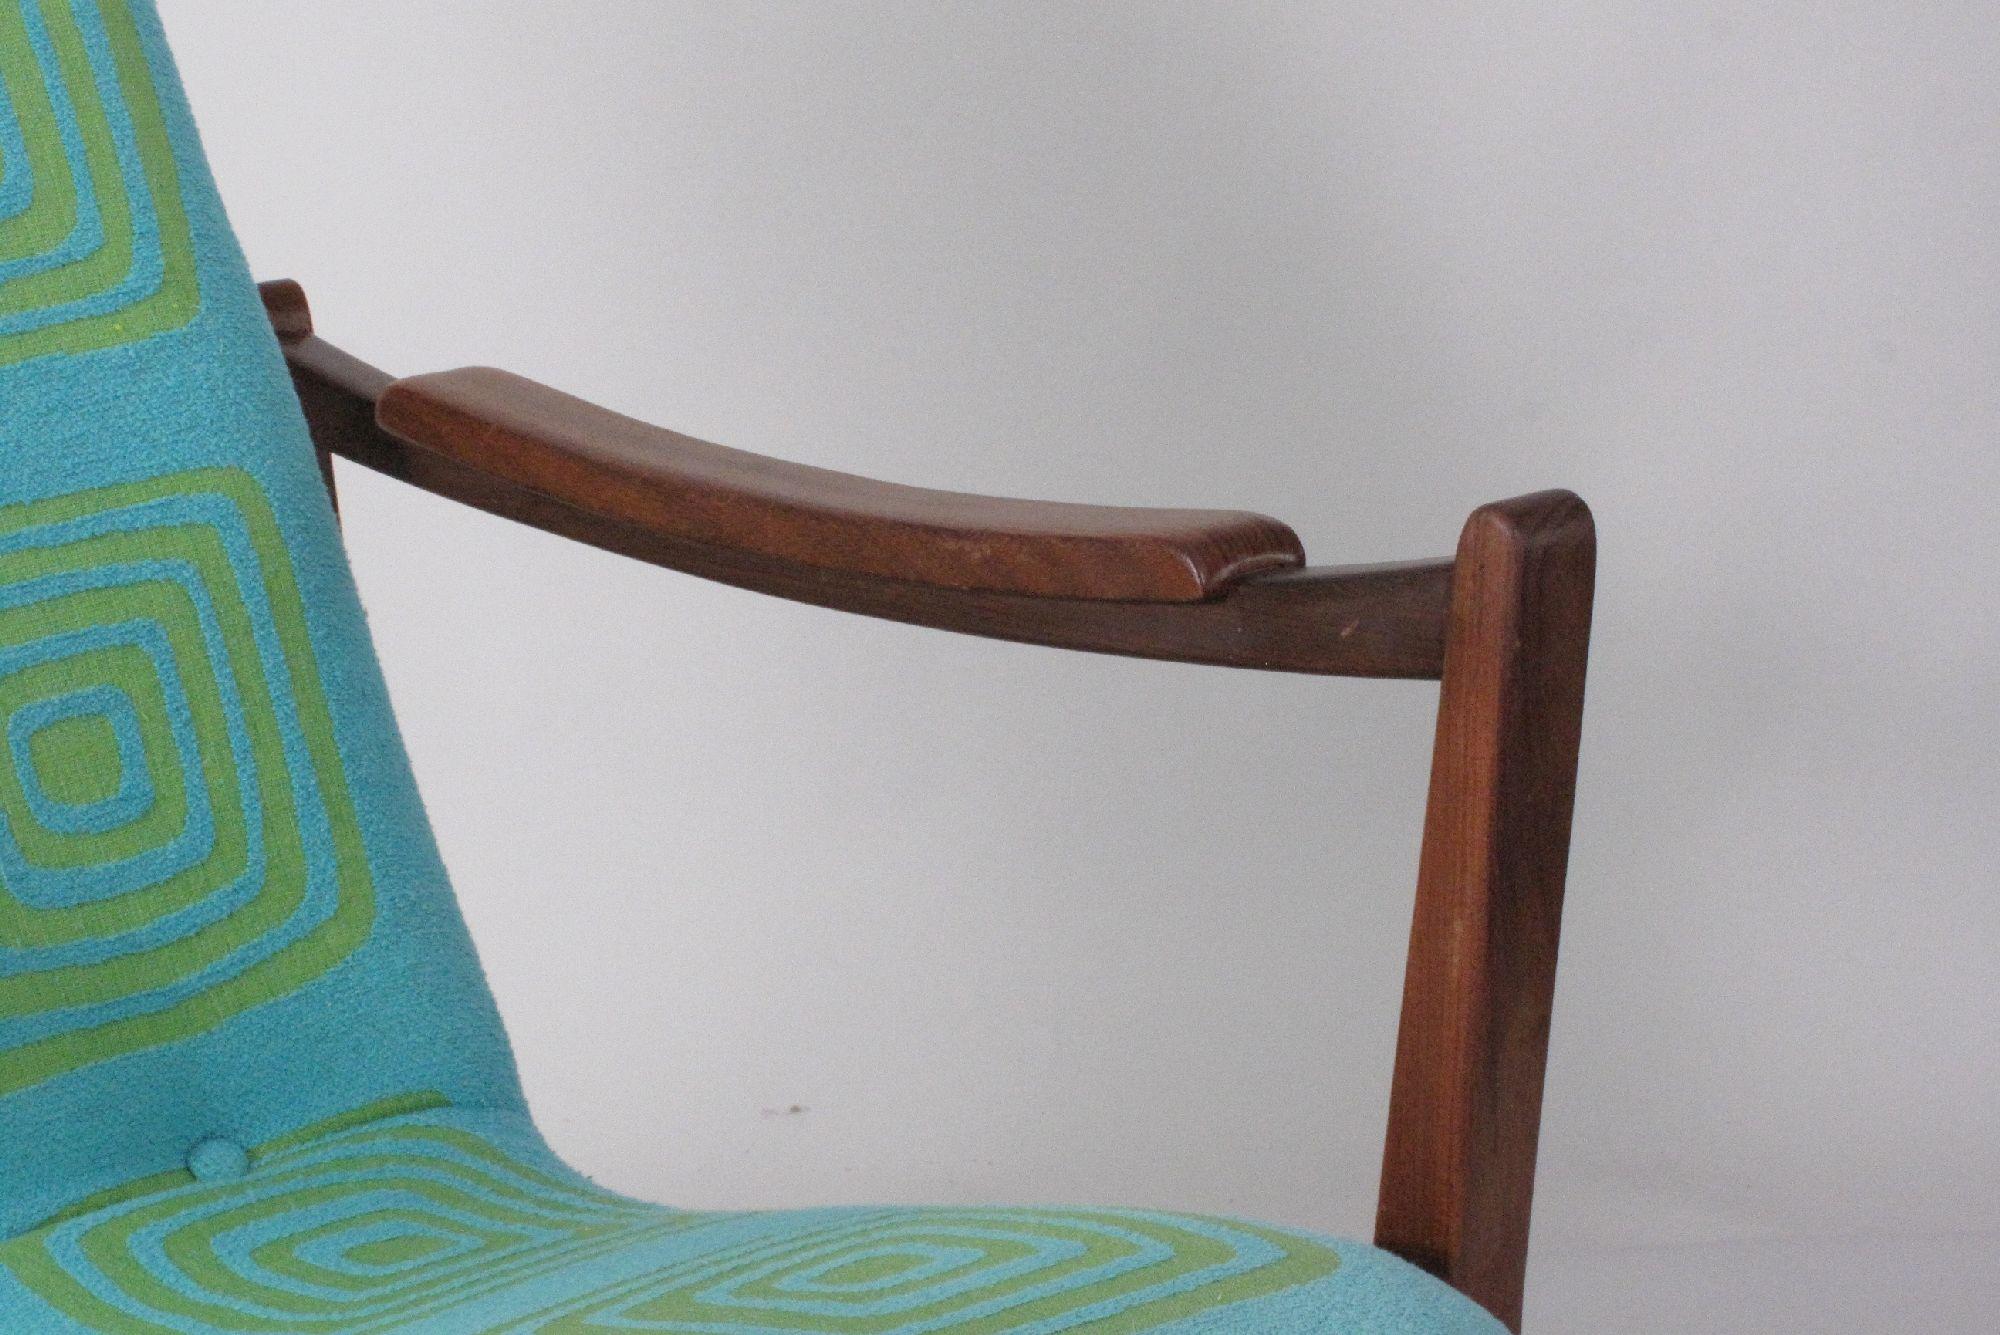 This chair is made in The Netherlands during the late 1960s.
A lot of Dutch manufacturers from this period were influenced by the Scandinavian style and some Scandinavian designers also worked for Dutch furniture makers like Pastoe and Fristho.
The